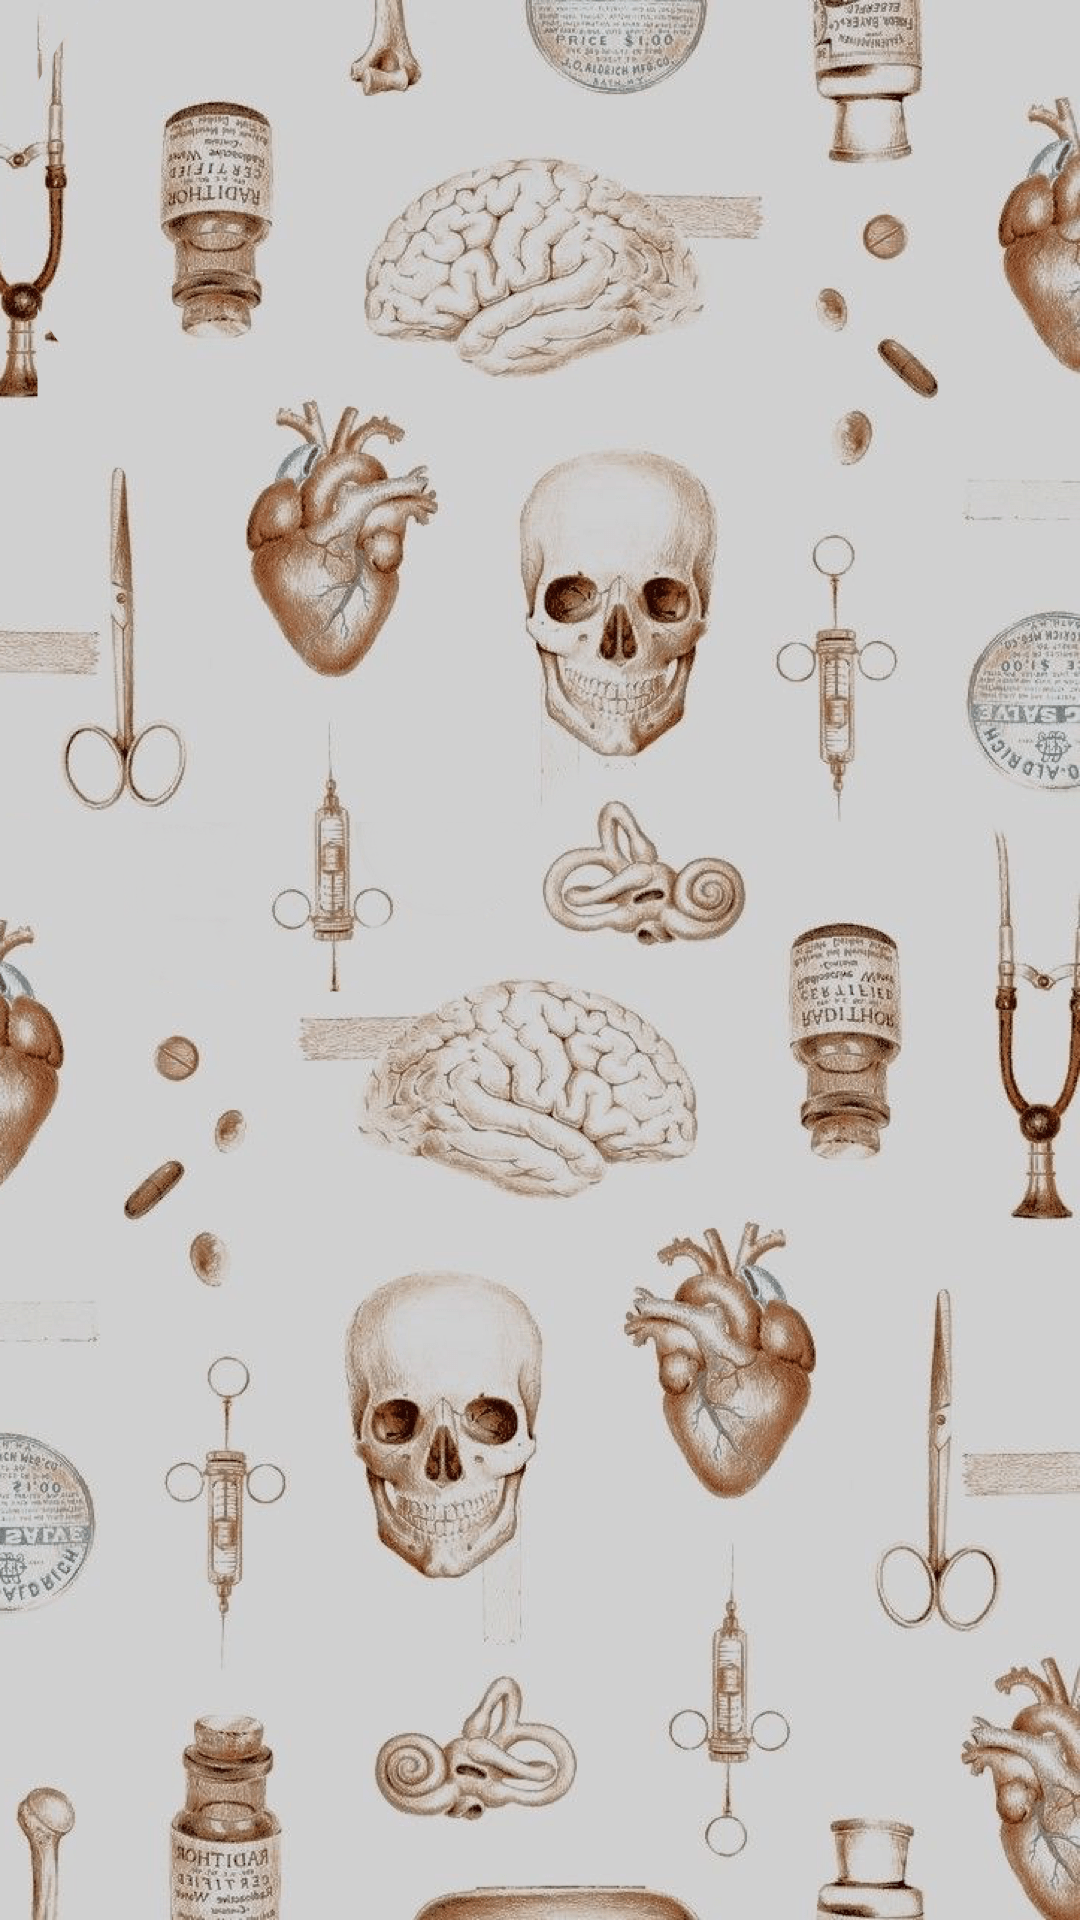 A pattern of medical instruments including a heart, brain, skull, and scissors. - Nurse